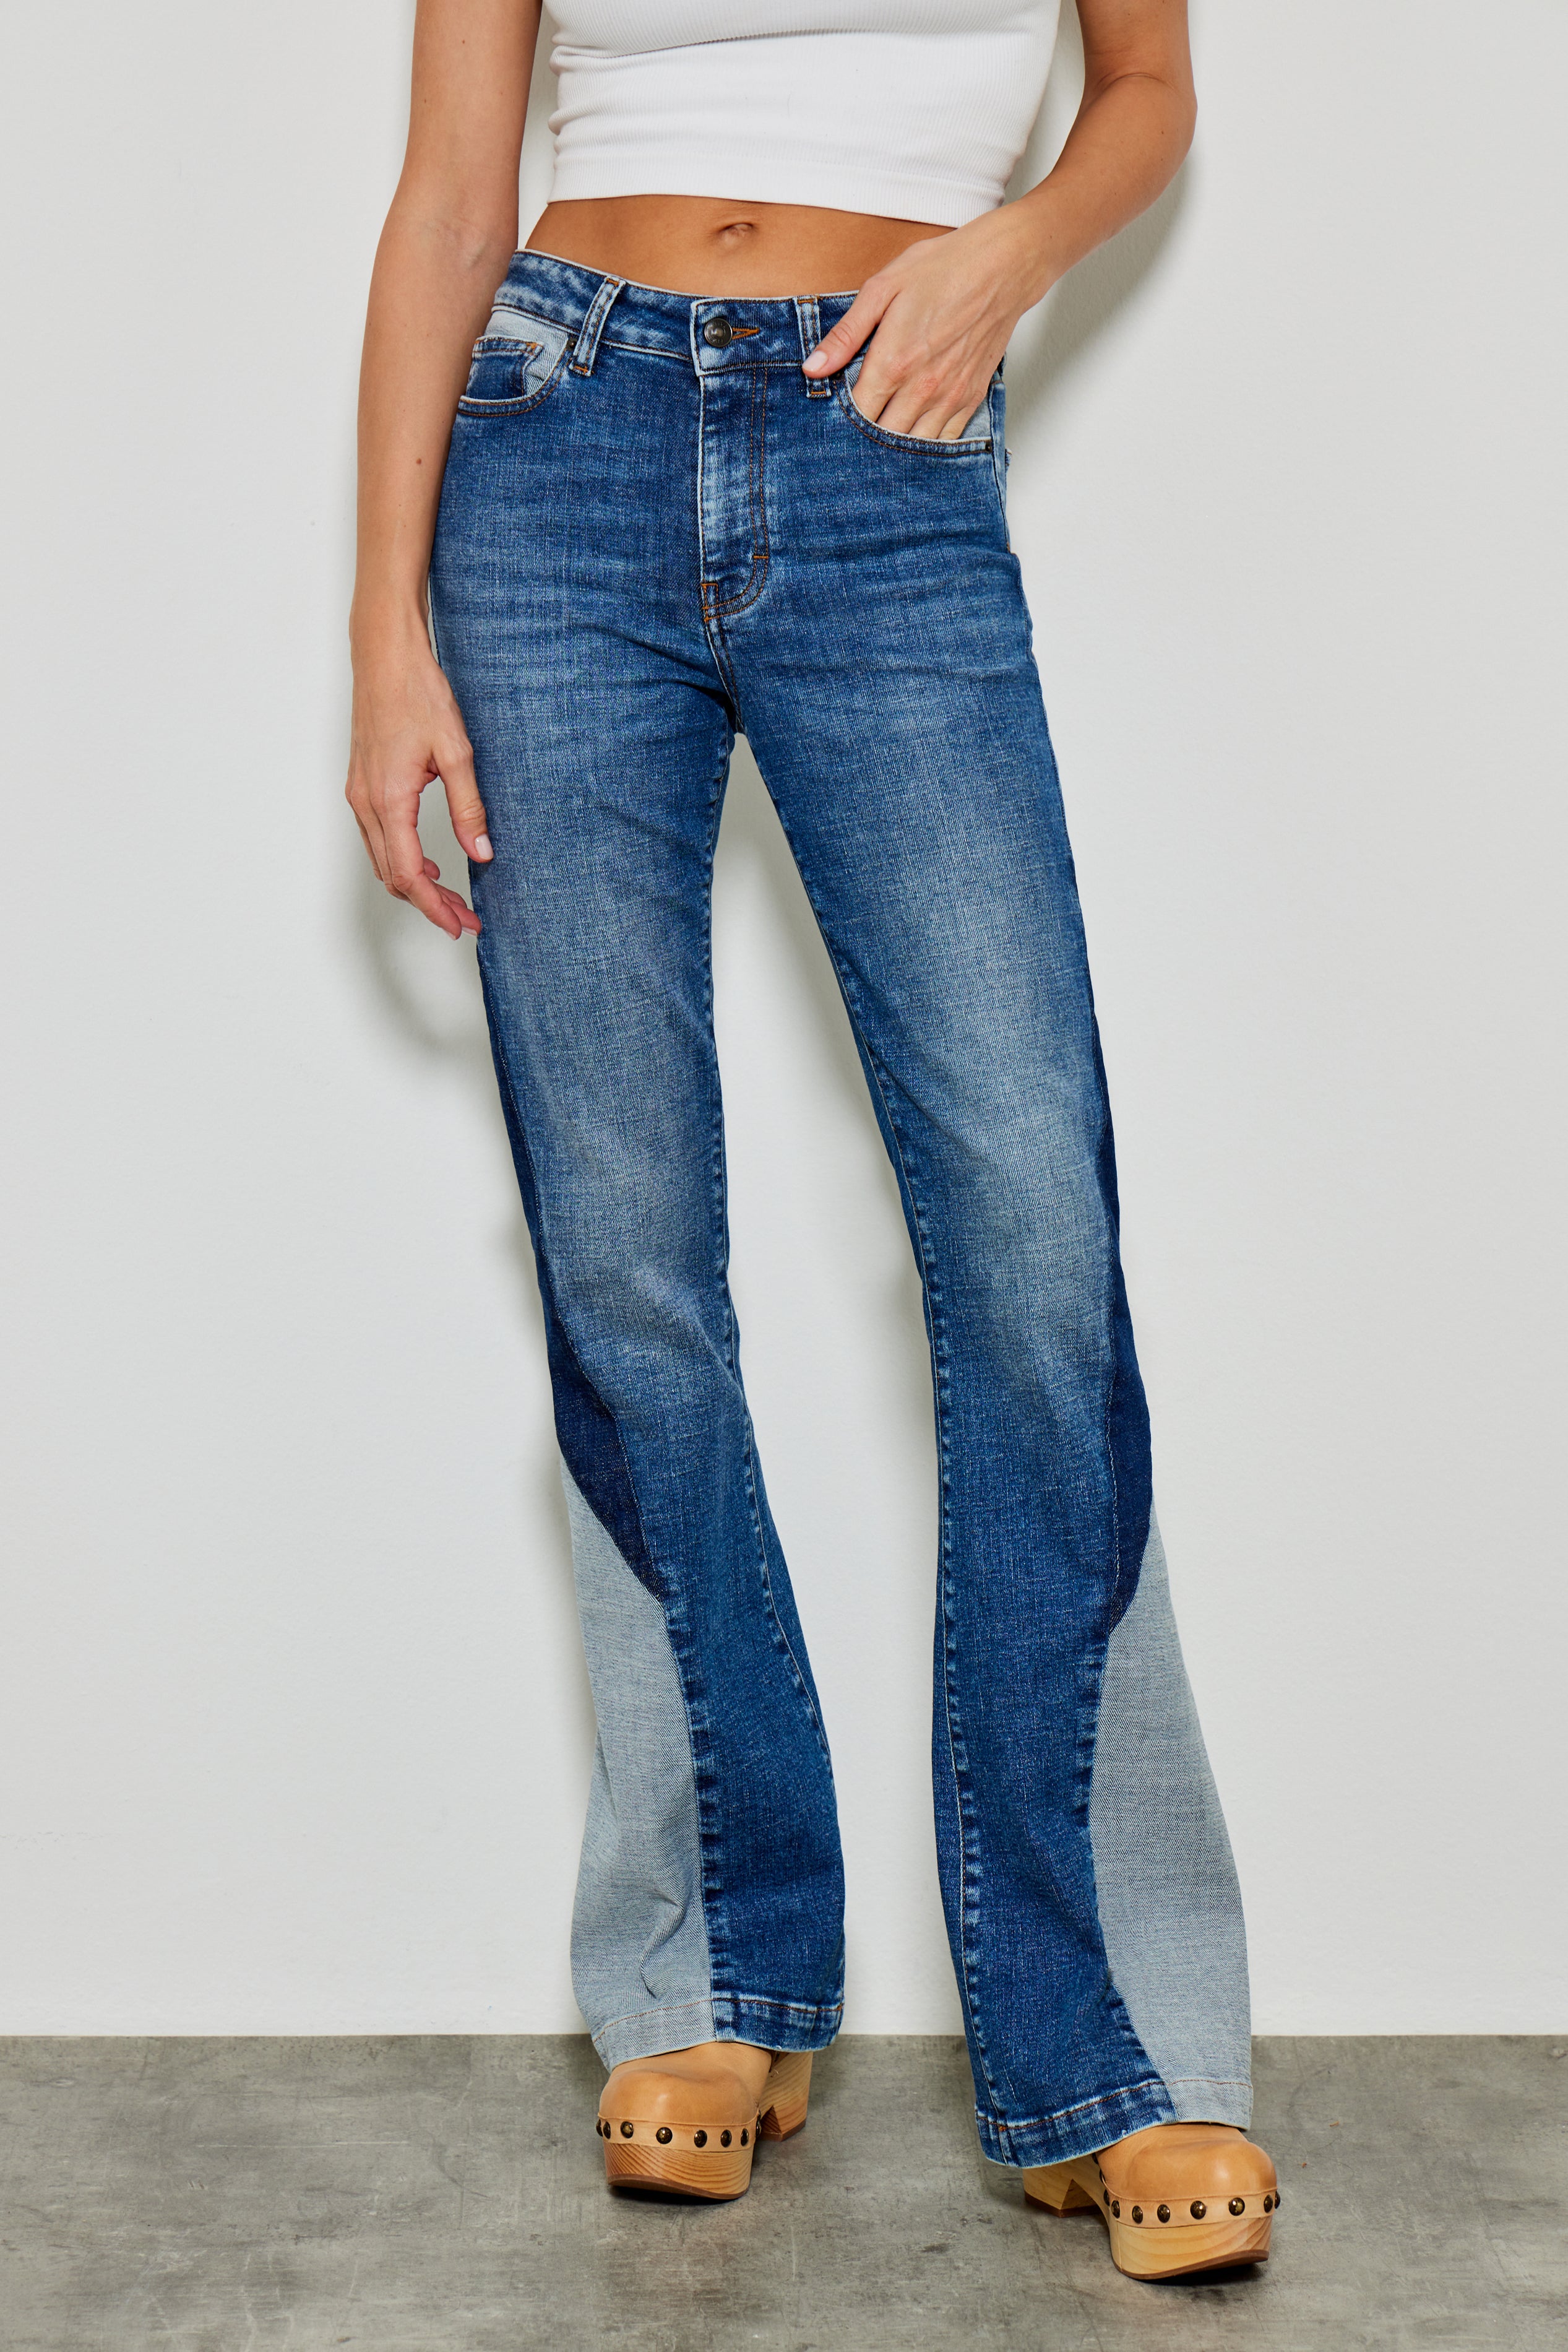 331 MONICA JEANS FLARE